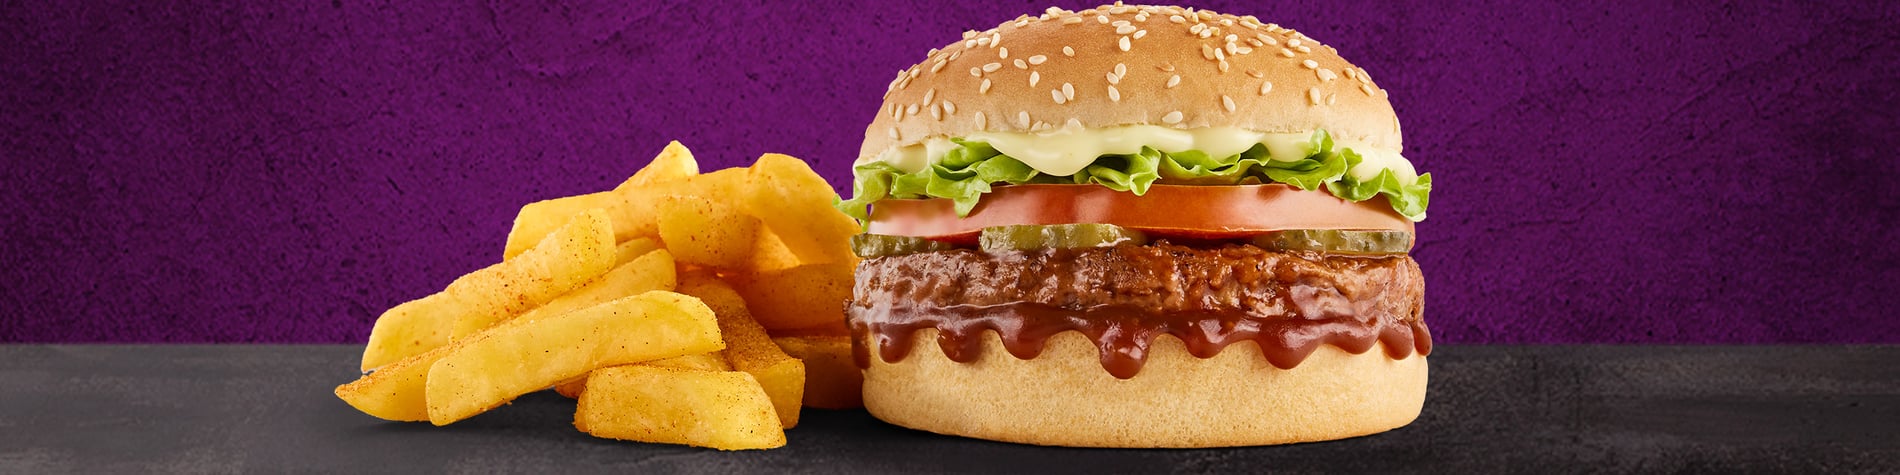 The NEW Mo’MjojoTM Burger Meal from Steers® Engen Avonlea. 2 Flame-Grilled pure beef patties, pineapple, macon, tomato, lettuce, and small Famous Hand-Cut Chips, on a purple background.